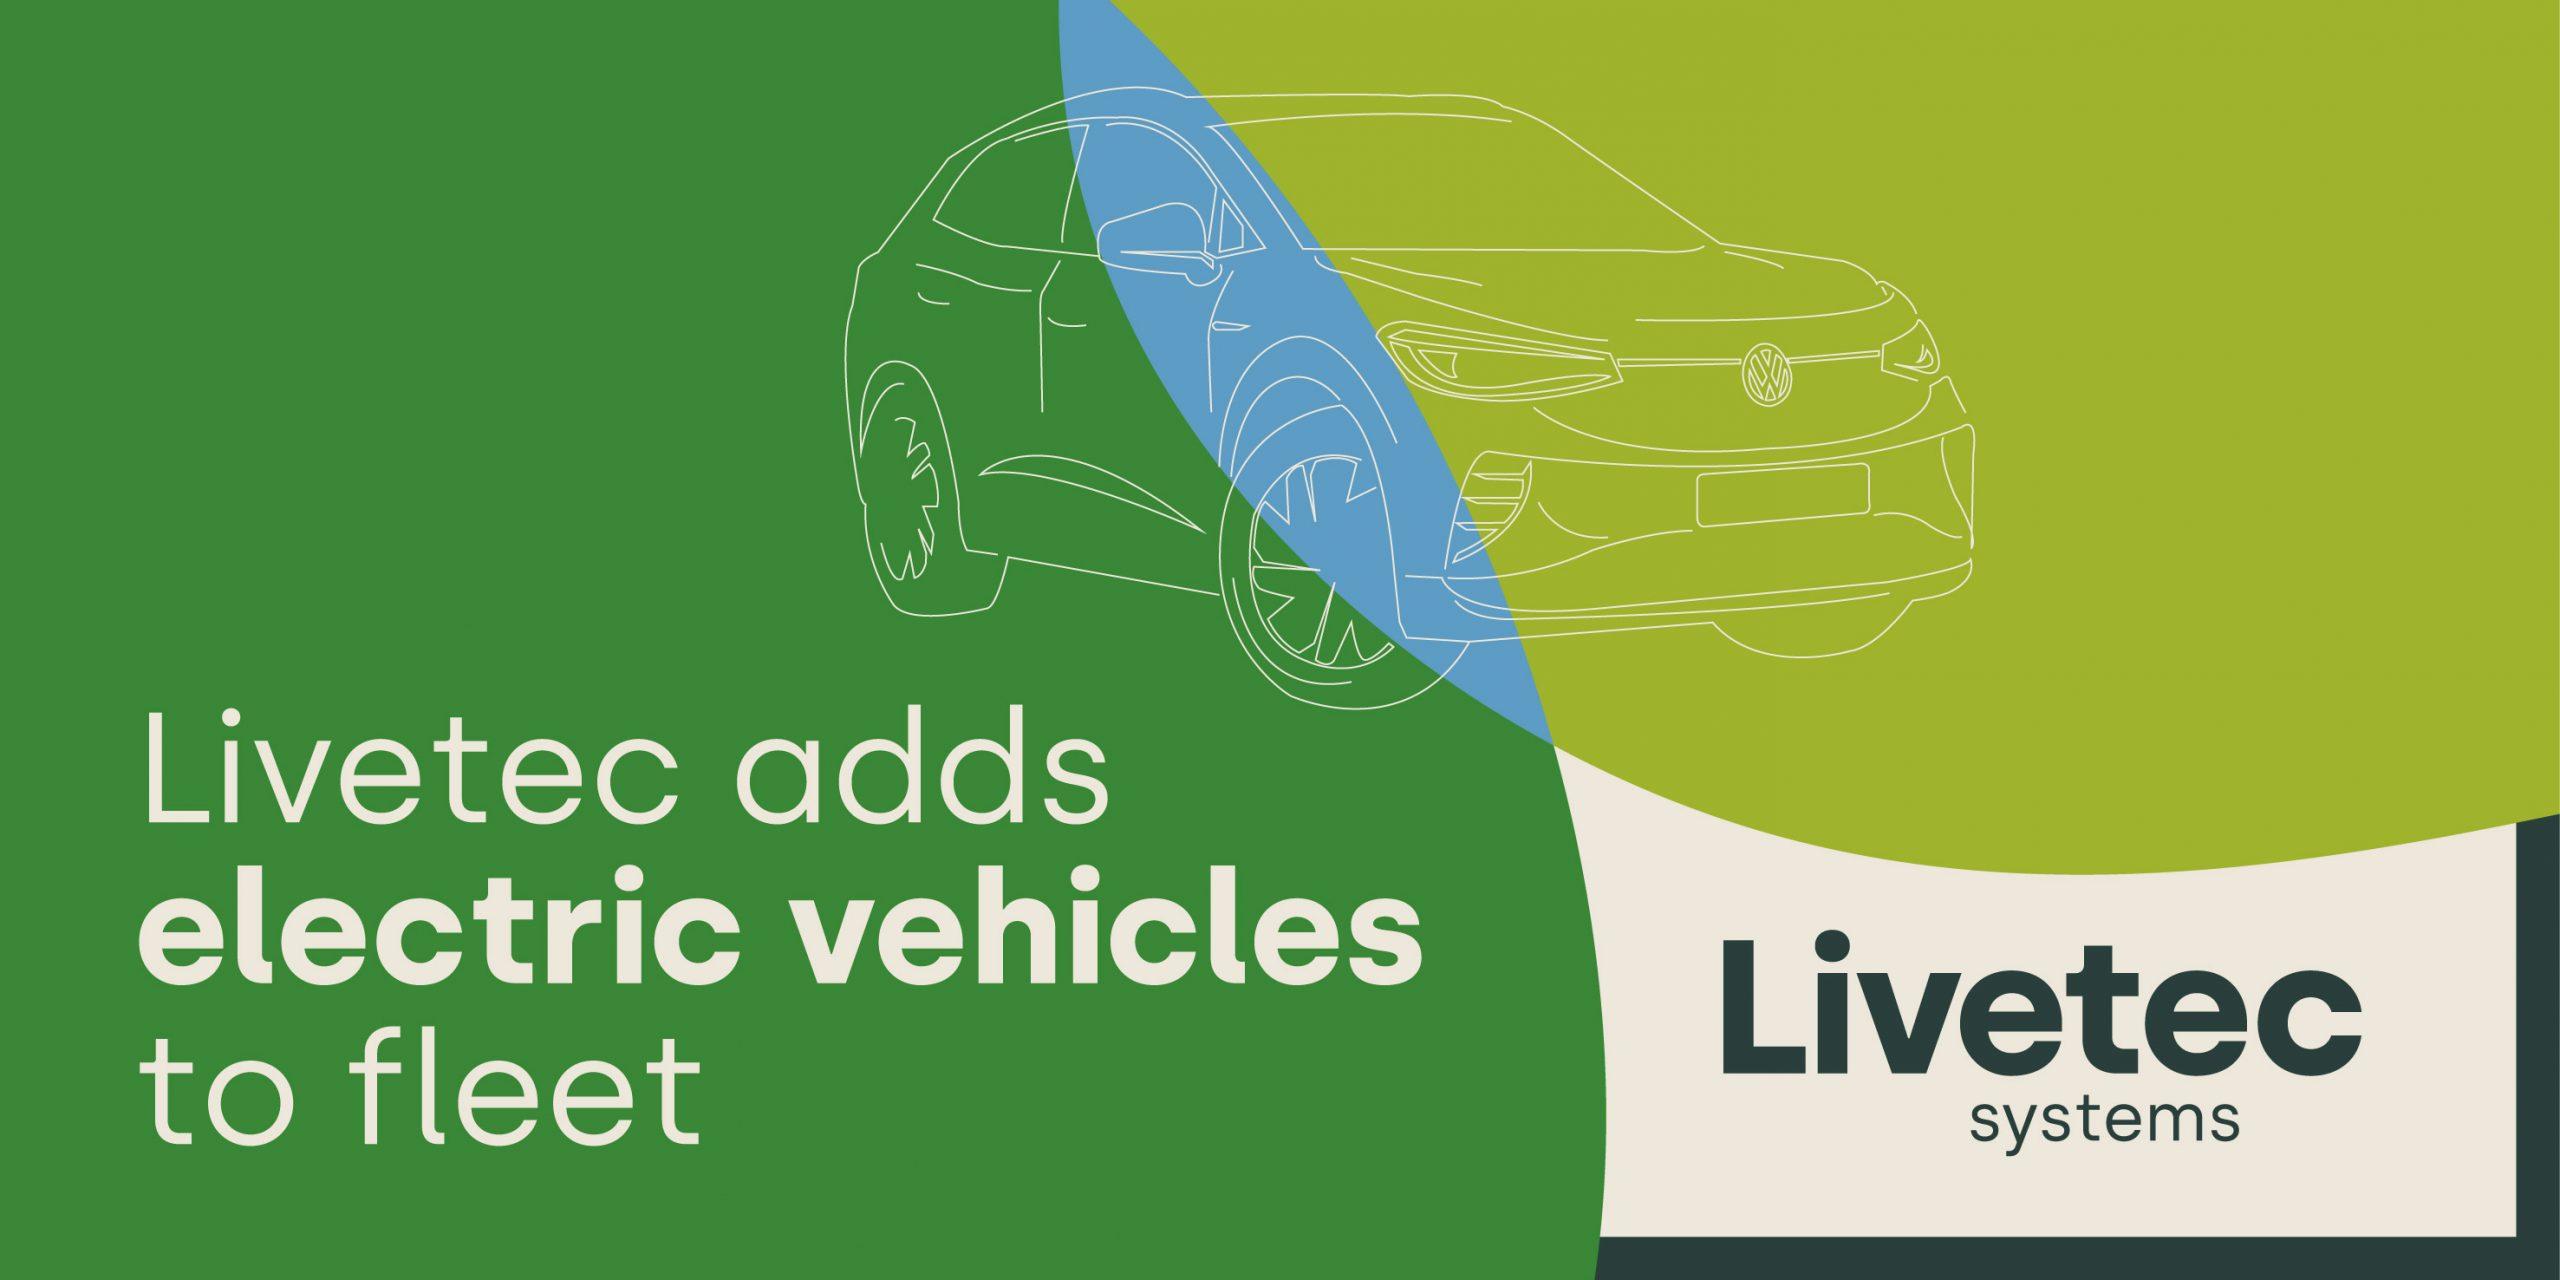 Livetec systems adds electric vehicles to fleet The first two electric vehicles we have invested in are the Volkswagen ID.4, which is Volkswagen’s first all-electric SUV and the Volkswagen ID.3 Family, a fully electric hatchback.